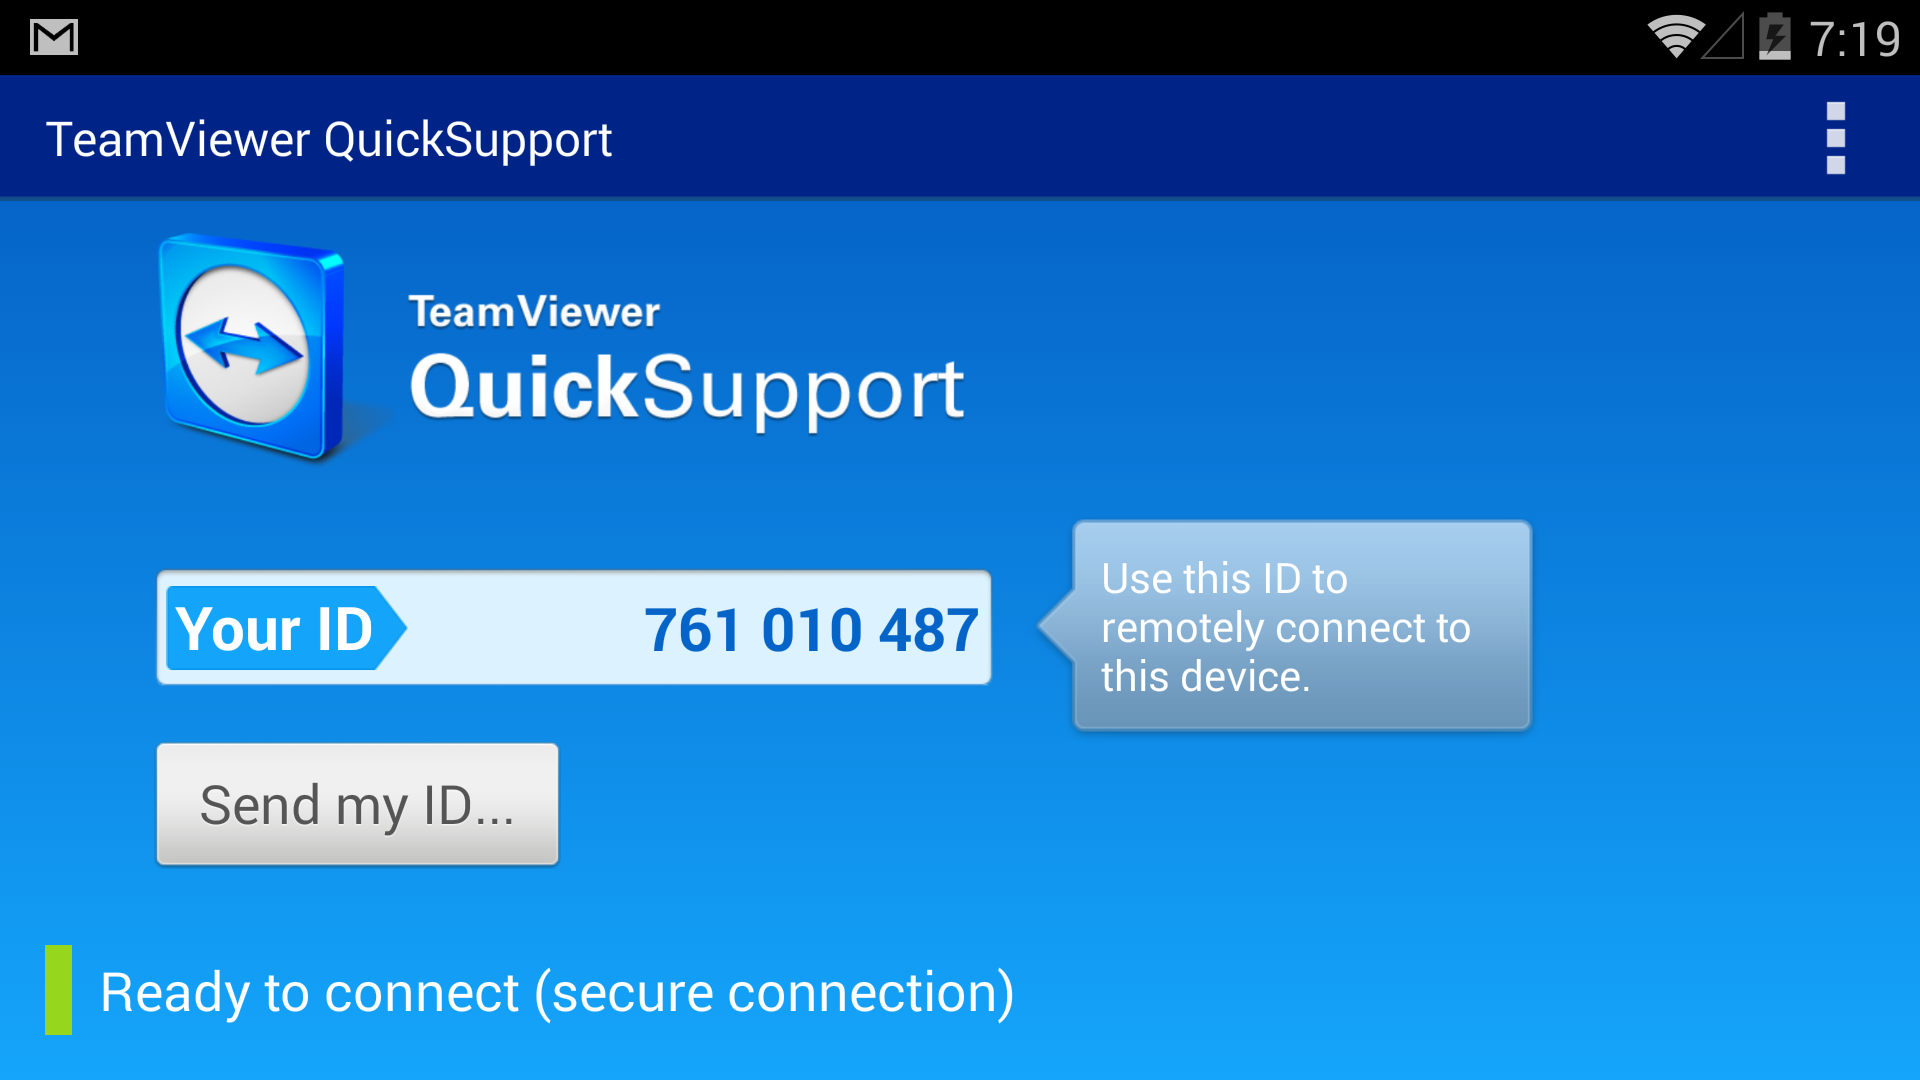 teamviewer quicksupport for pc